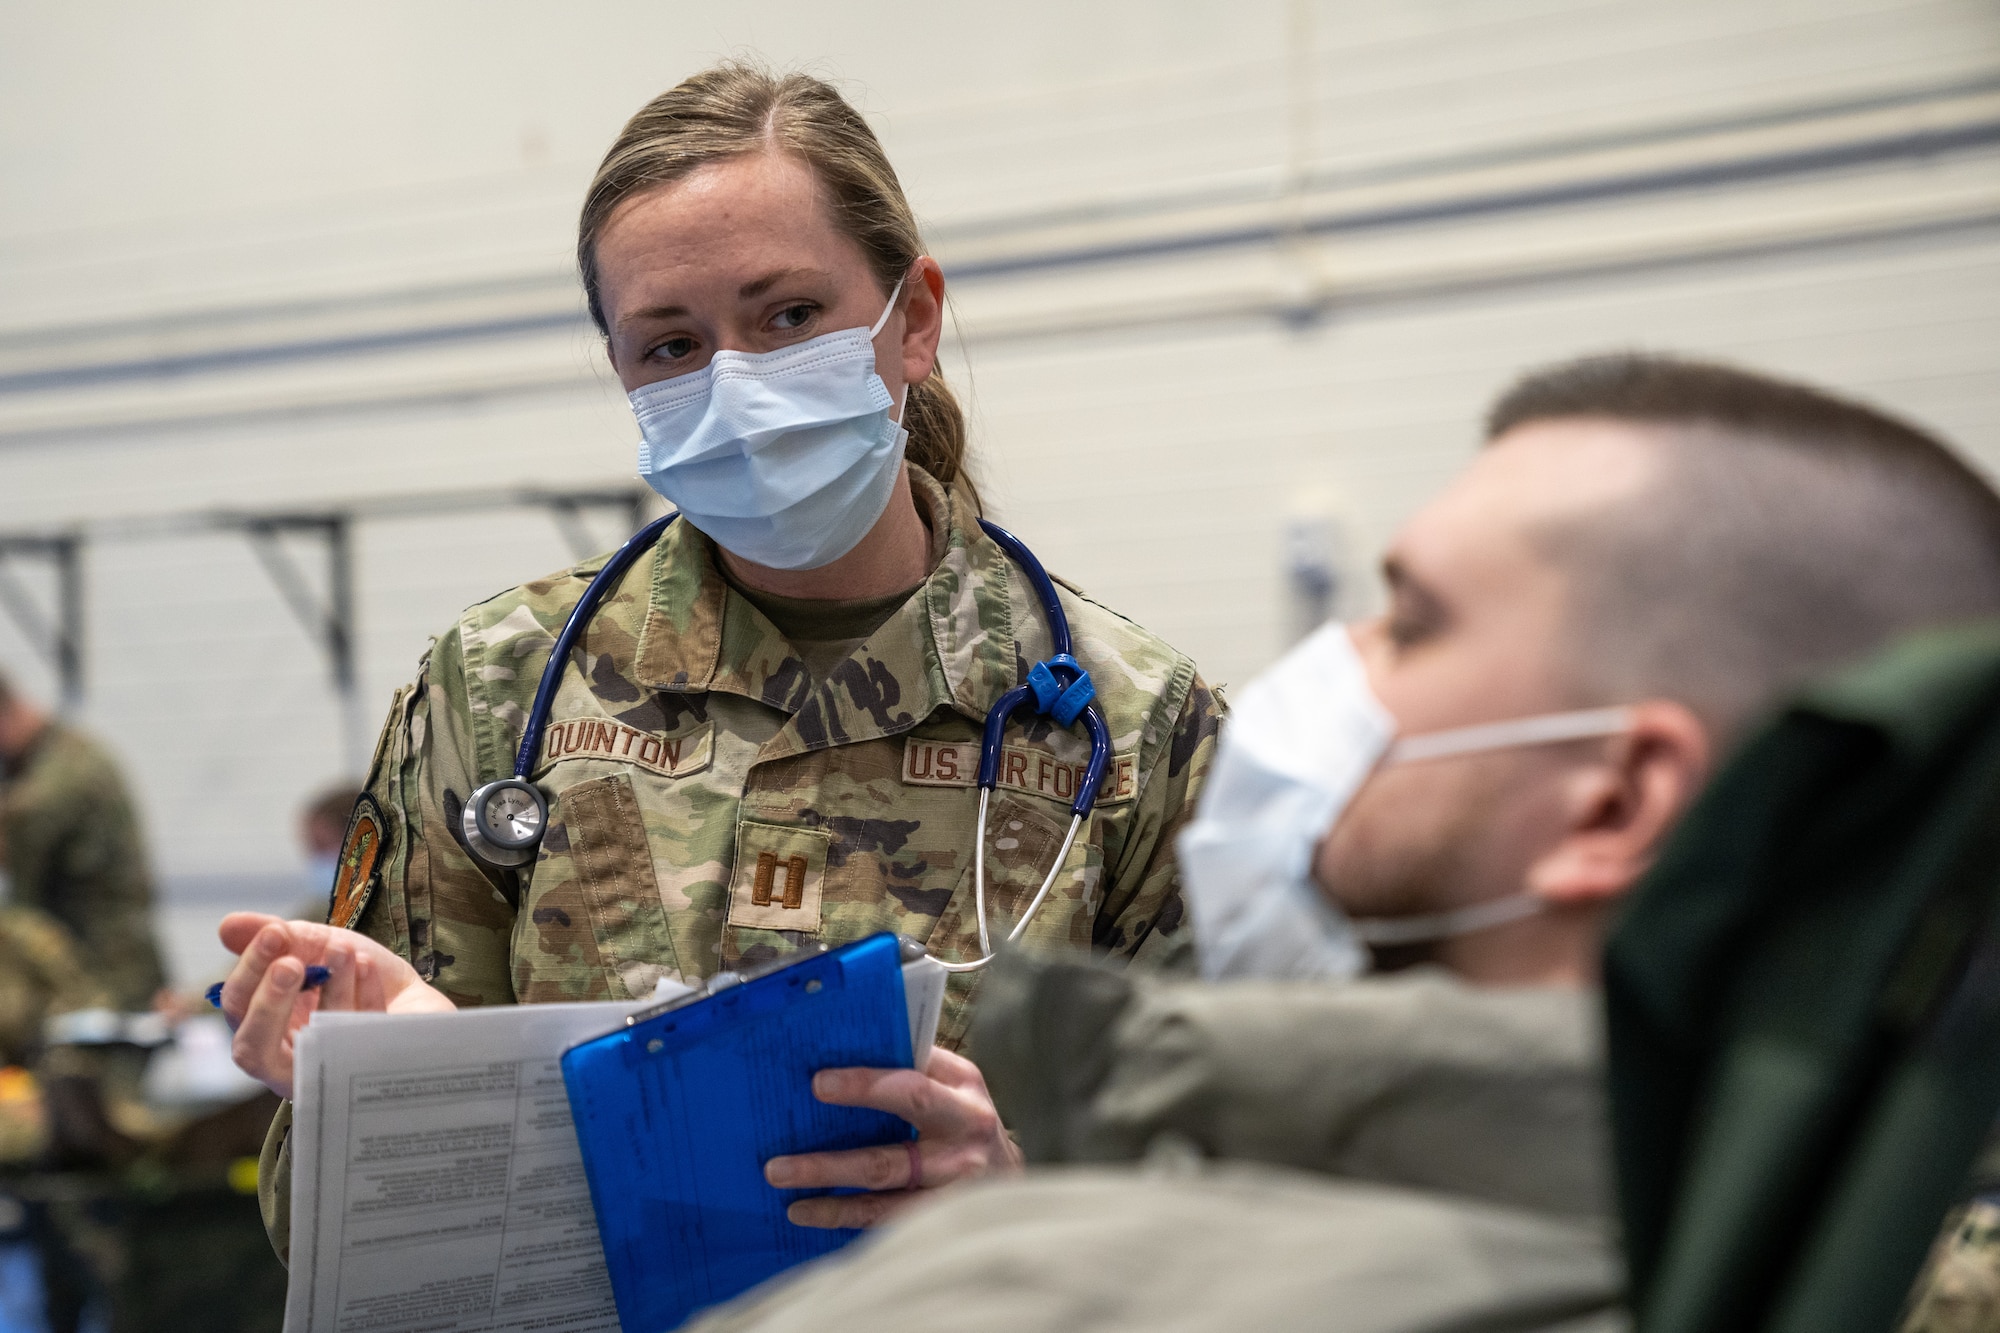 U.S. Air Force Capt. Andrea Quinton stands next to a patient laying in a cot